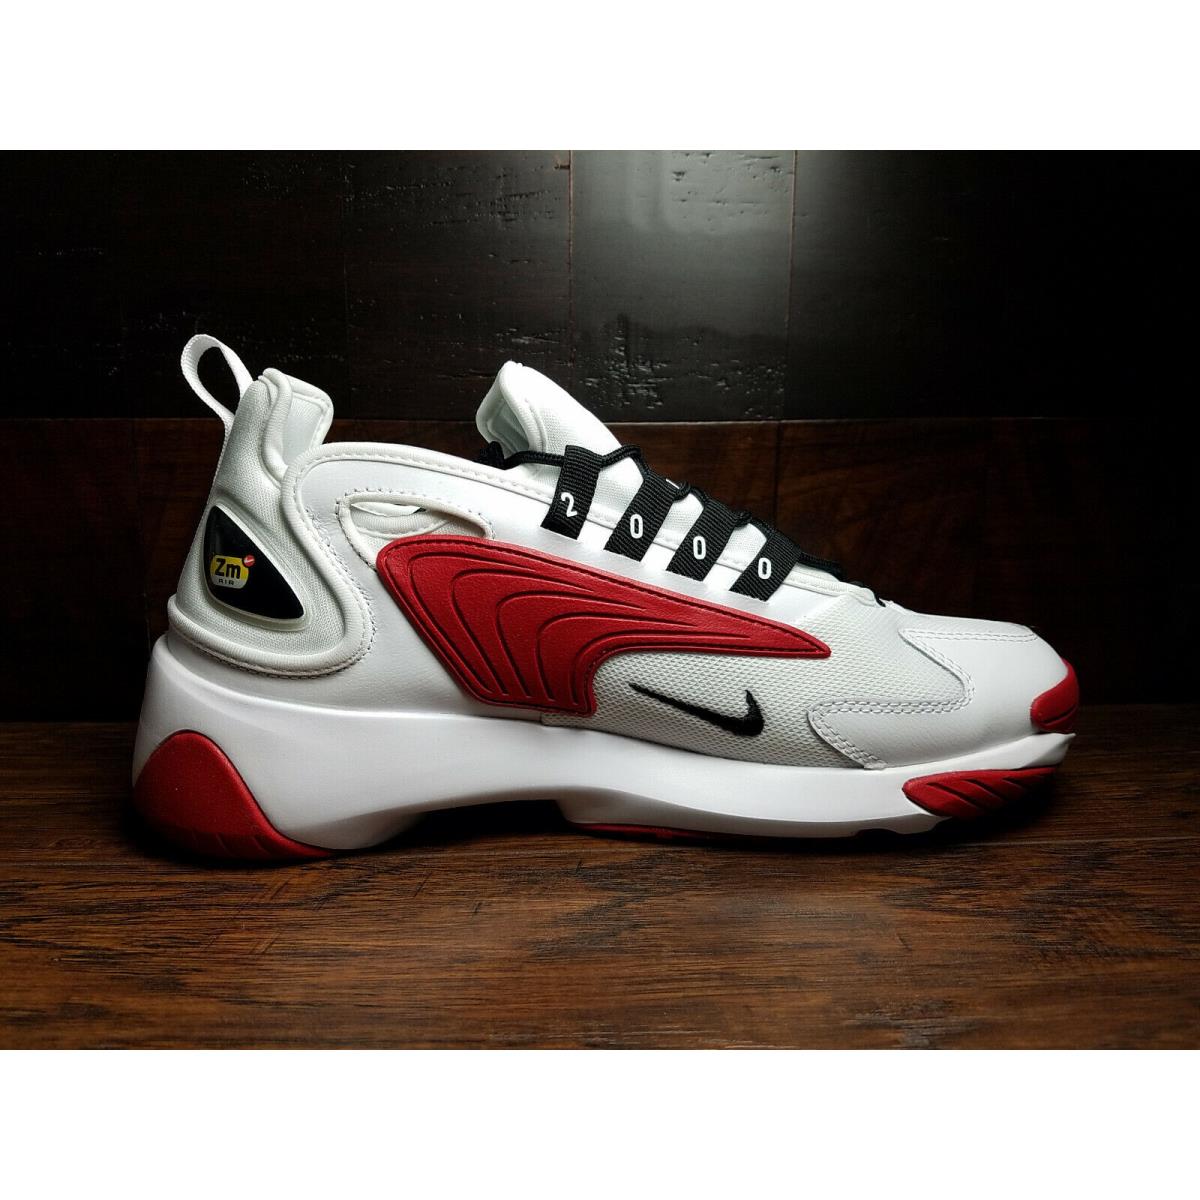 Nike shoes Zoom - White / Black / Red 1